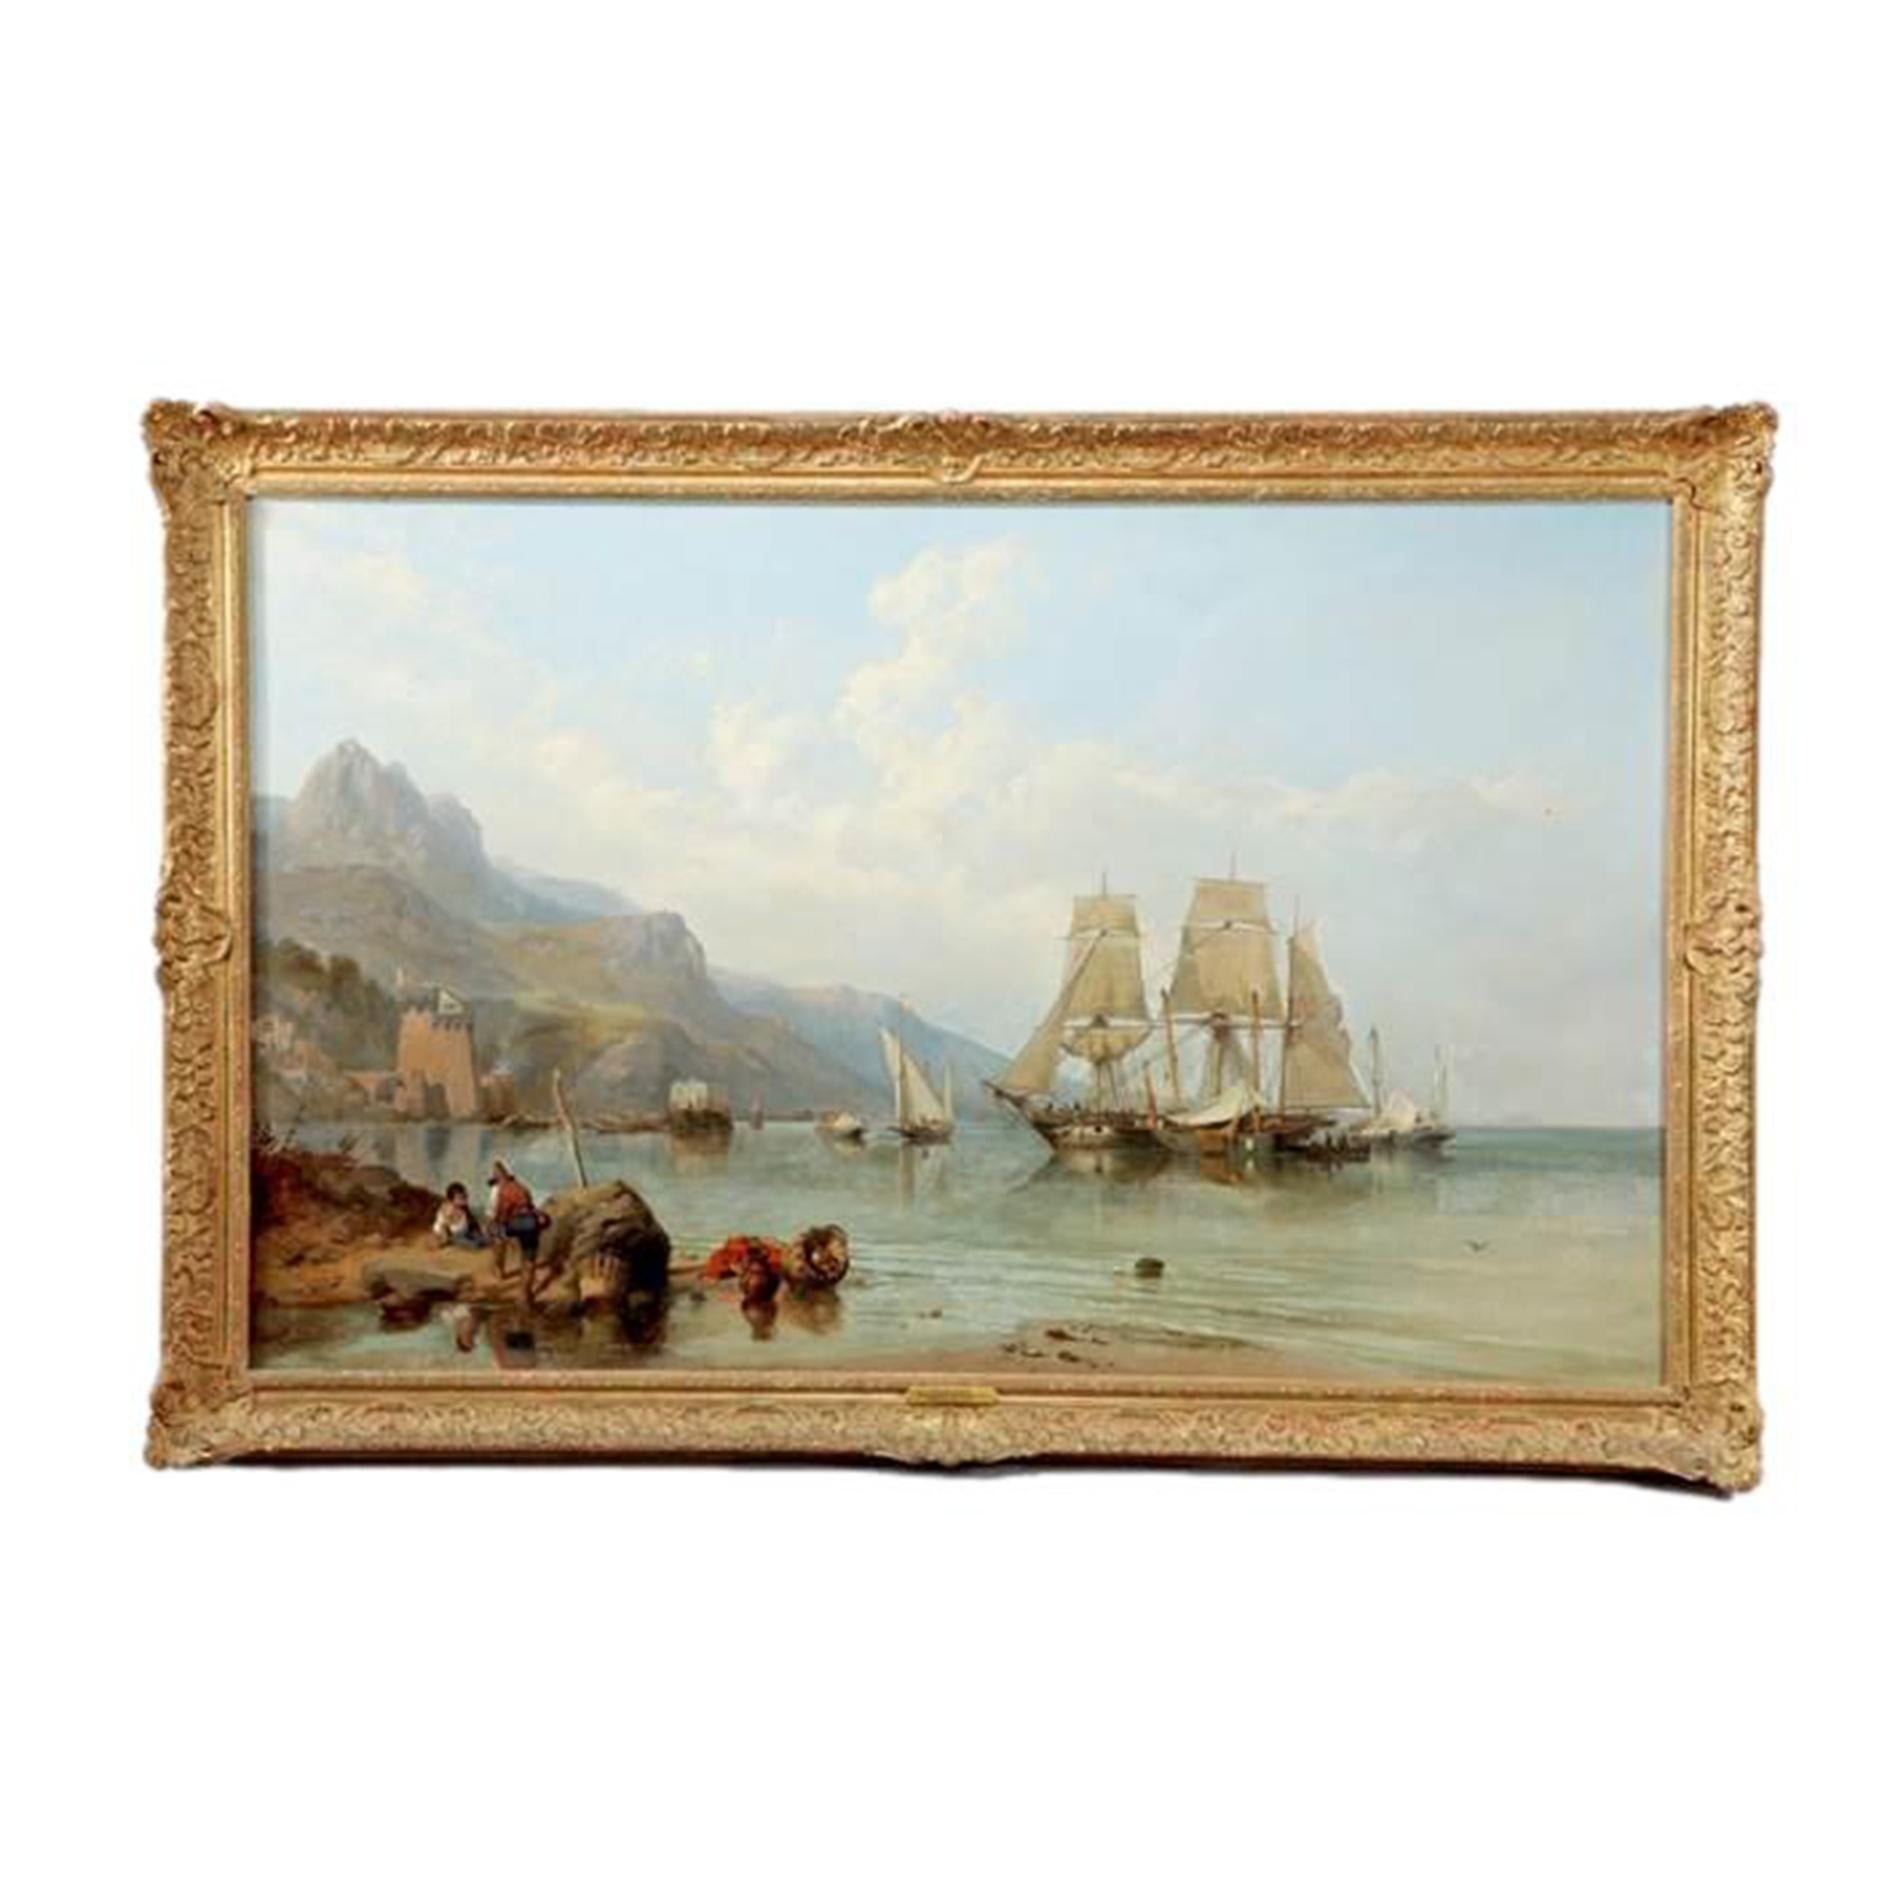 Clarkson Stanfield: The Gulf of Salerno

This oil painting on canvas shows commercial shipping and fishermen in the Gulf of Salerno.  The tower at Vietri is visible in the background.  There is a three masted barque surrounded by a cluster of